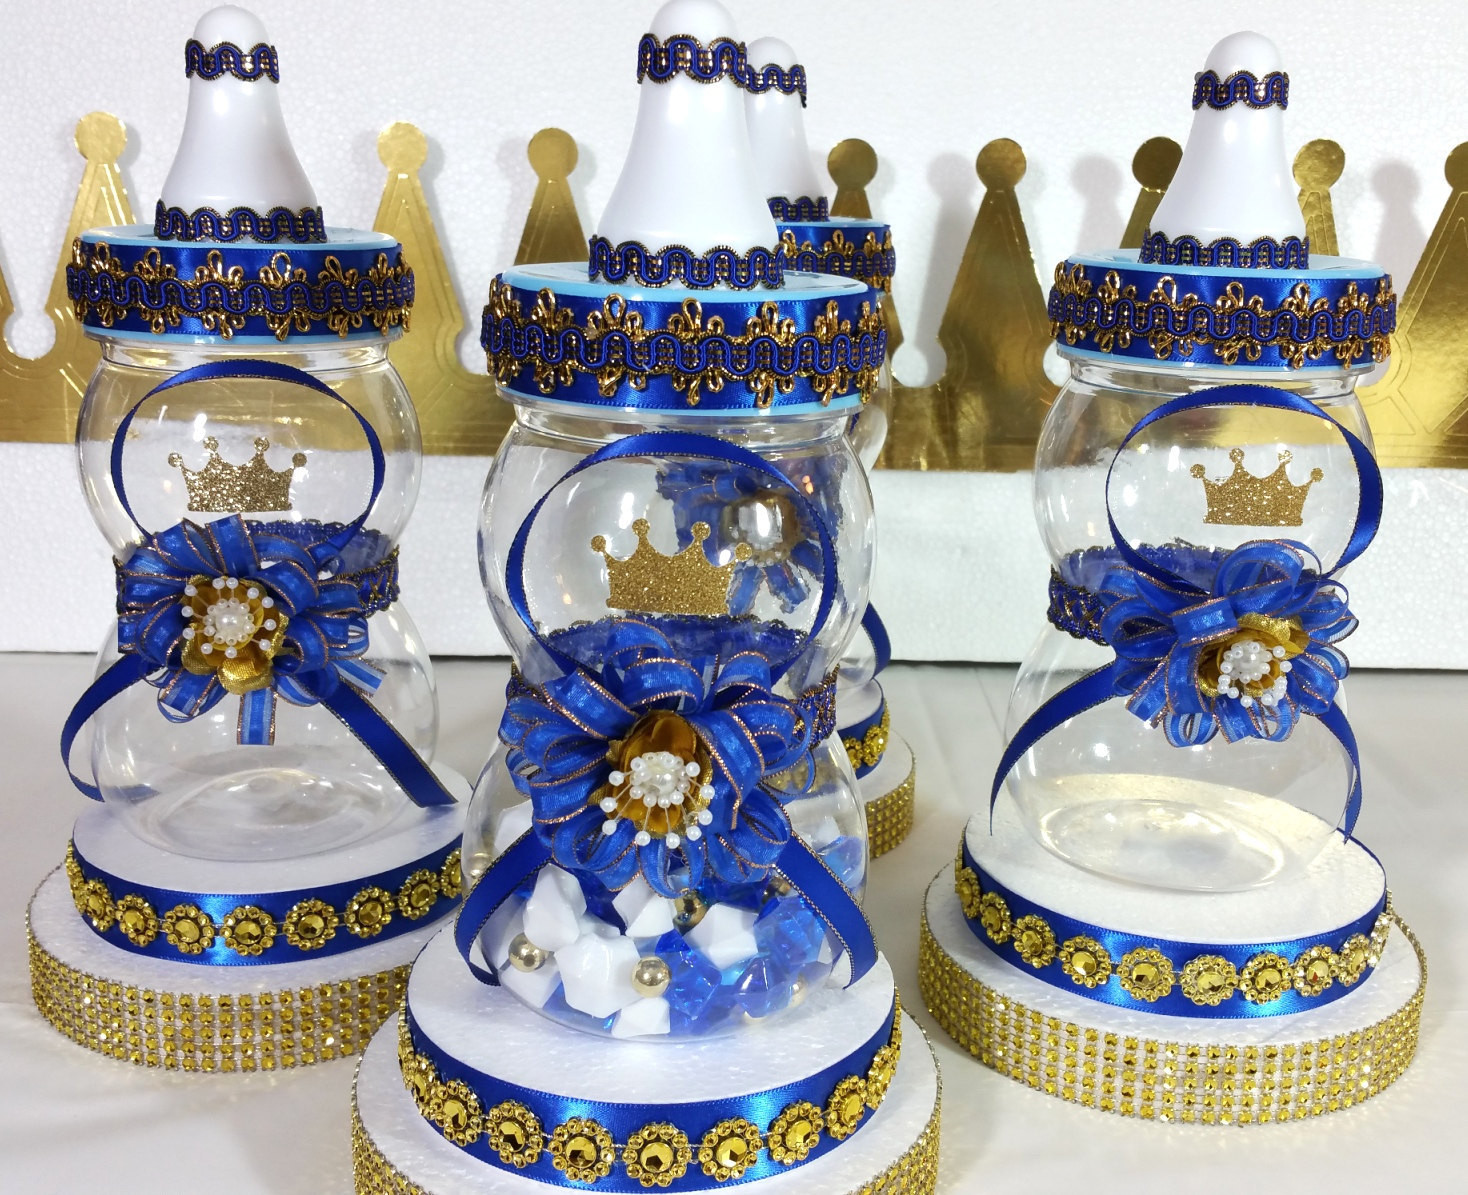 Prince Baby Shower Decoration Ideas
 Royal Prince Baby Shower Centerpiece Boys Royal Blue and